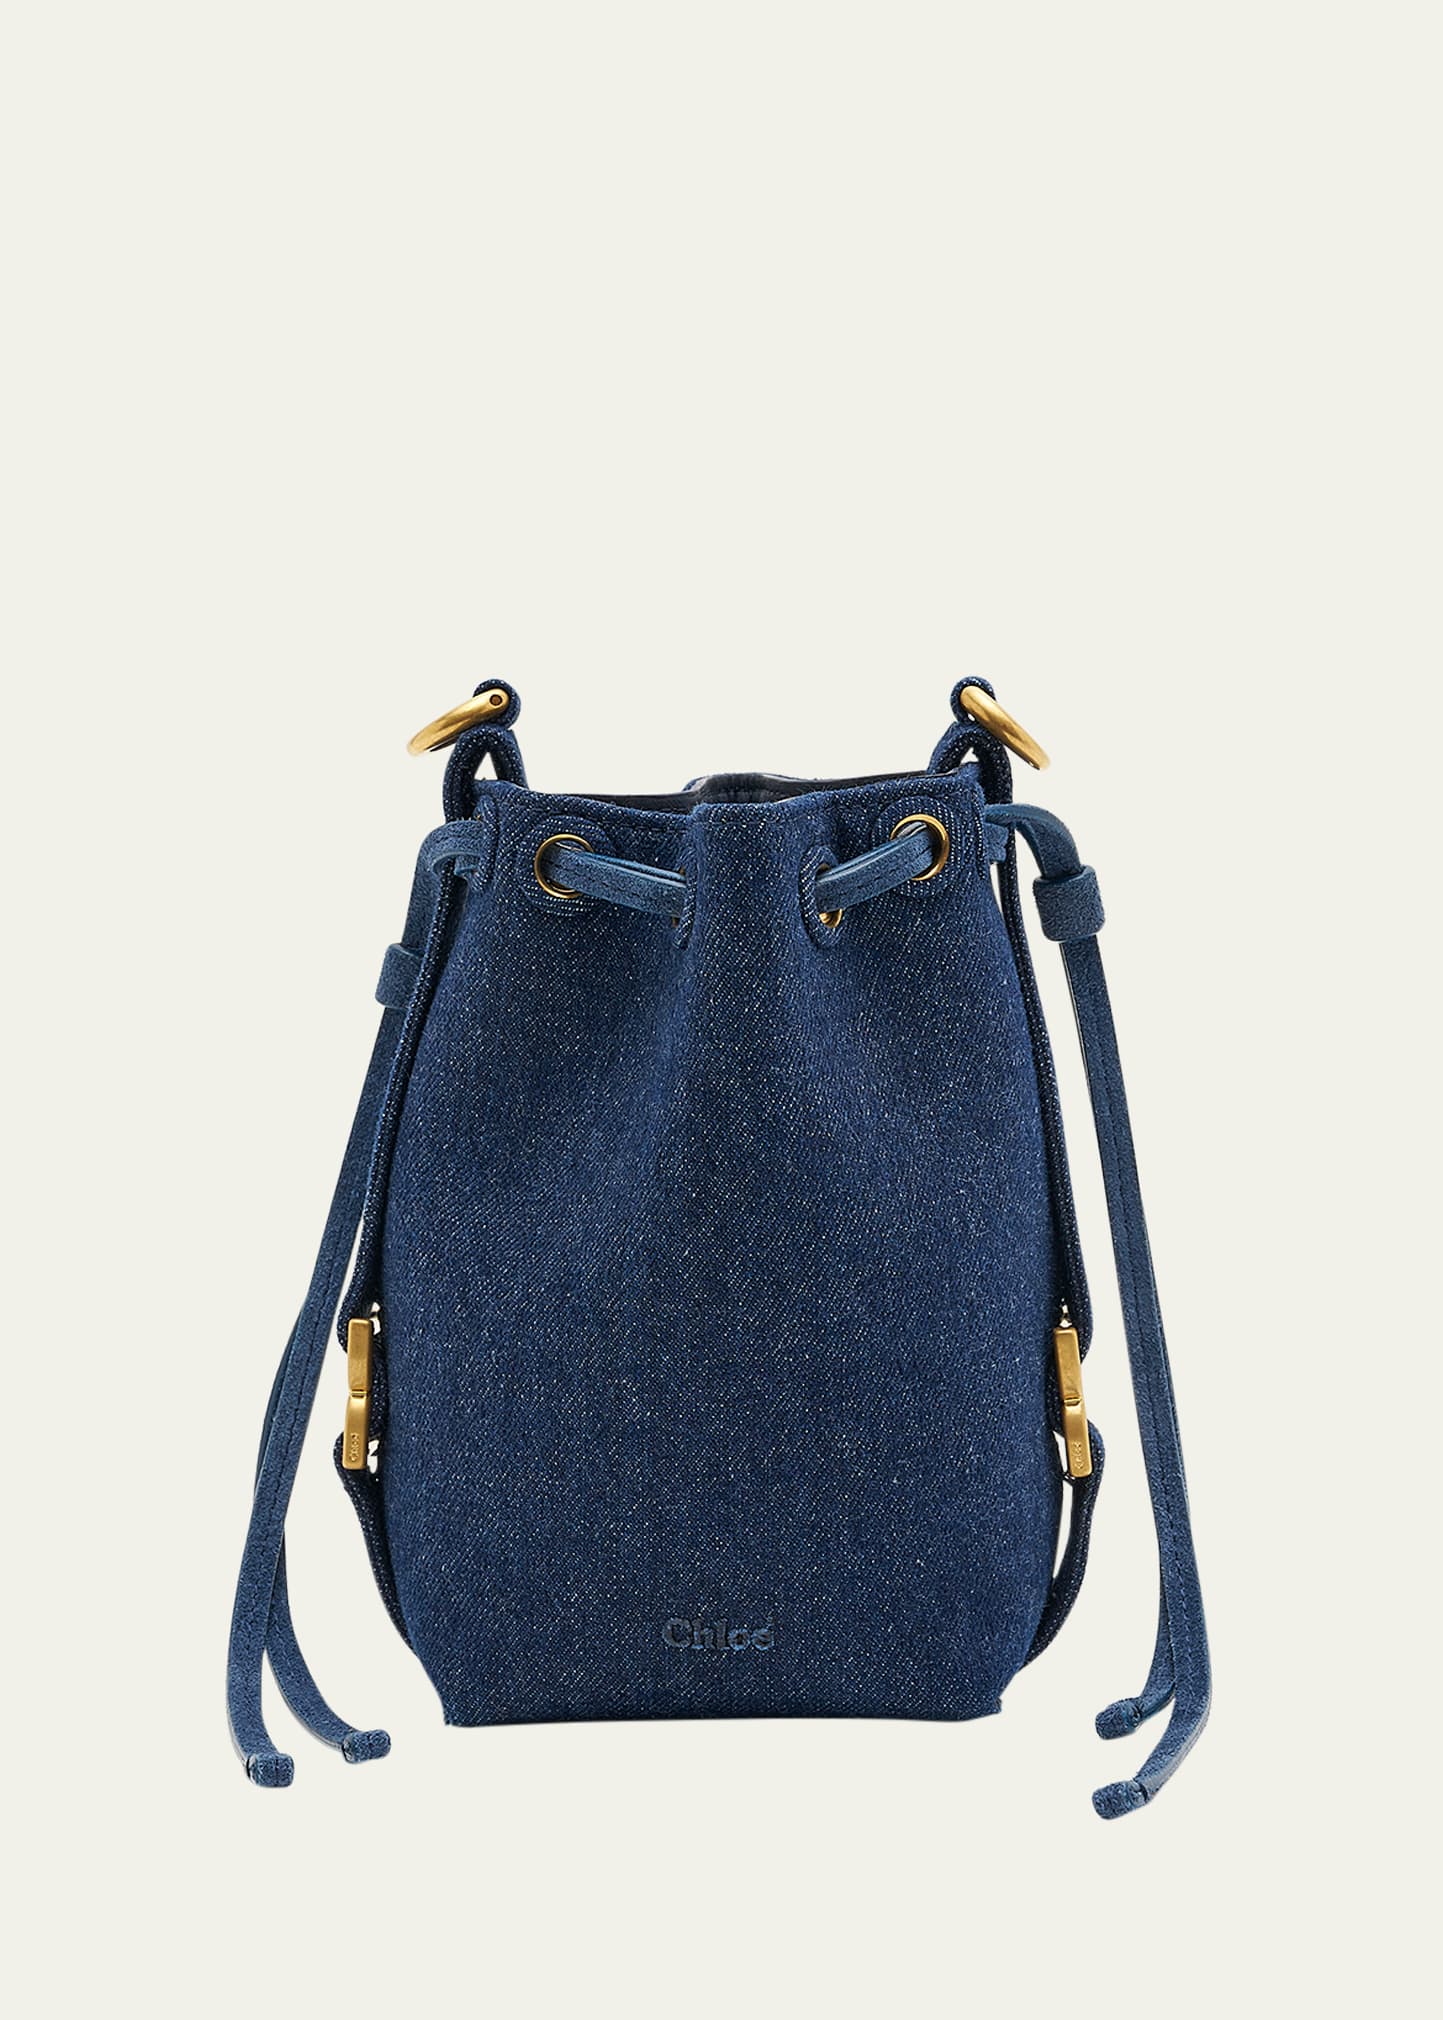 Marcie Micro Bucket Bag in Denim with Chain Strap